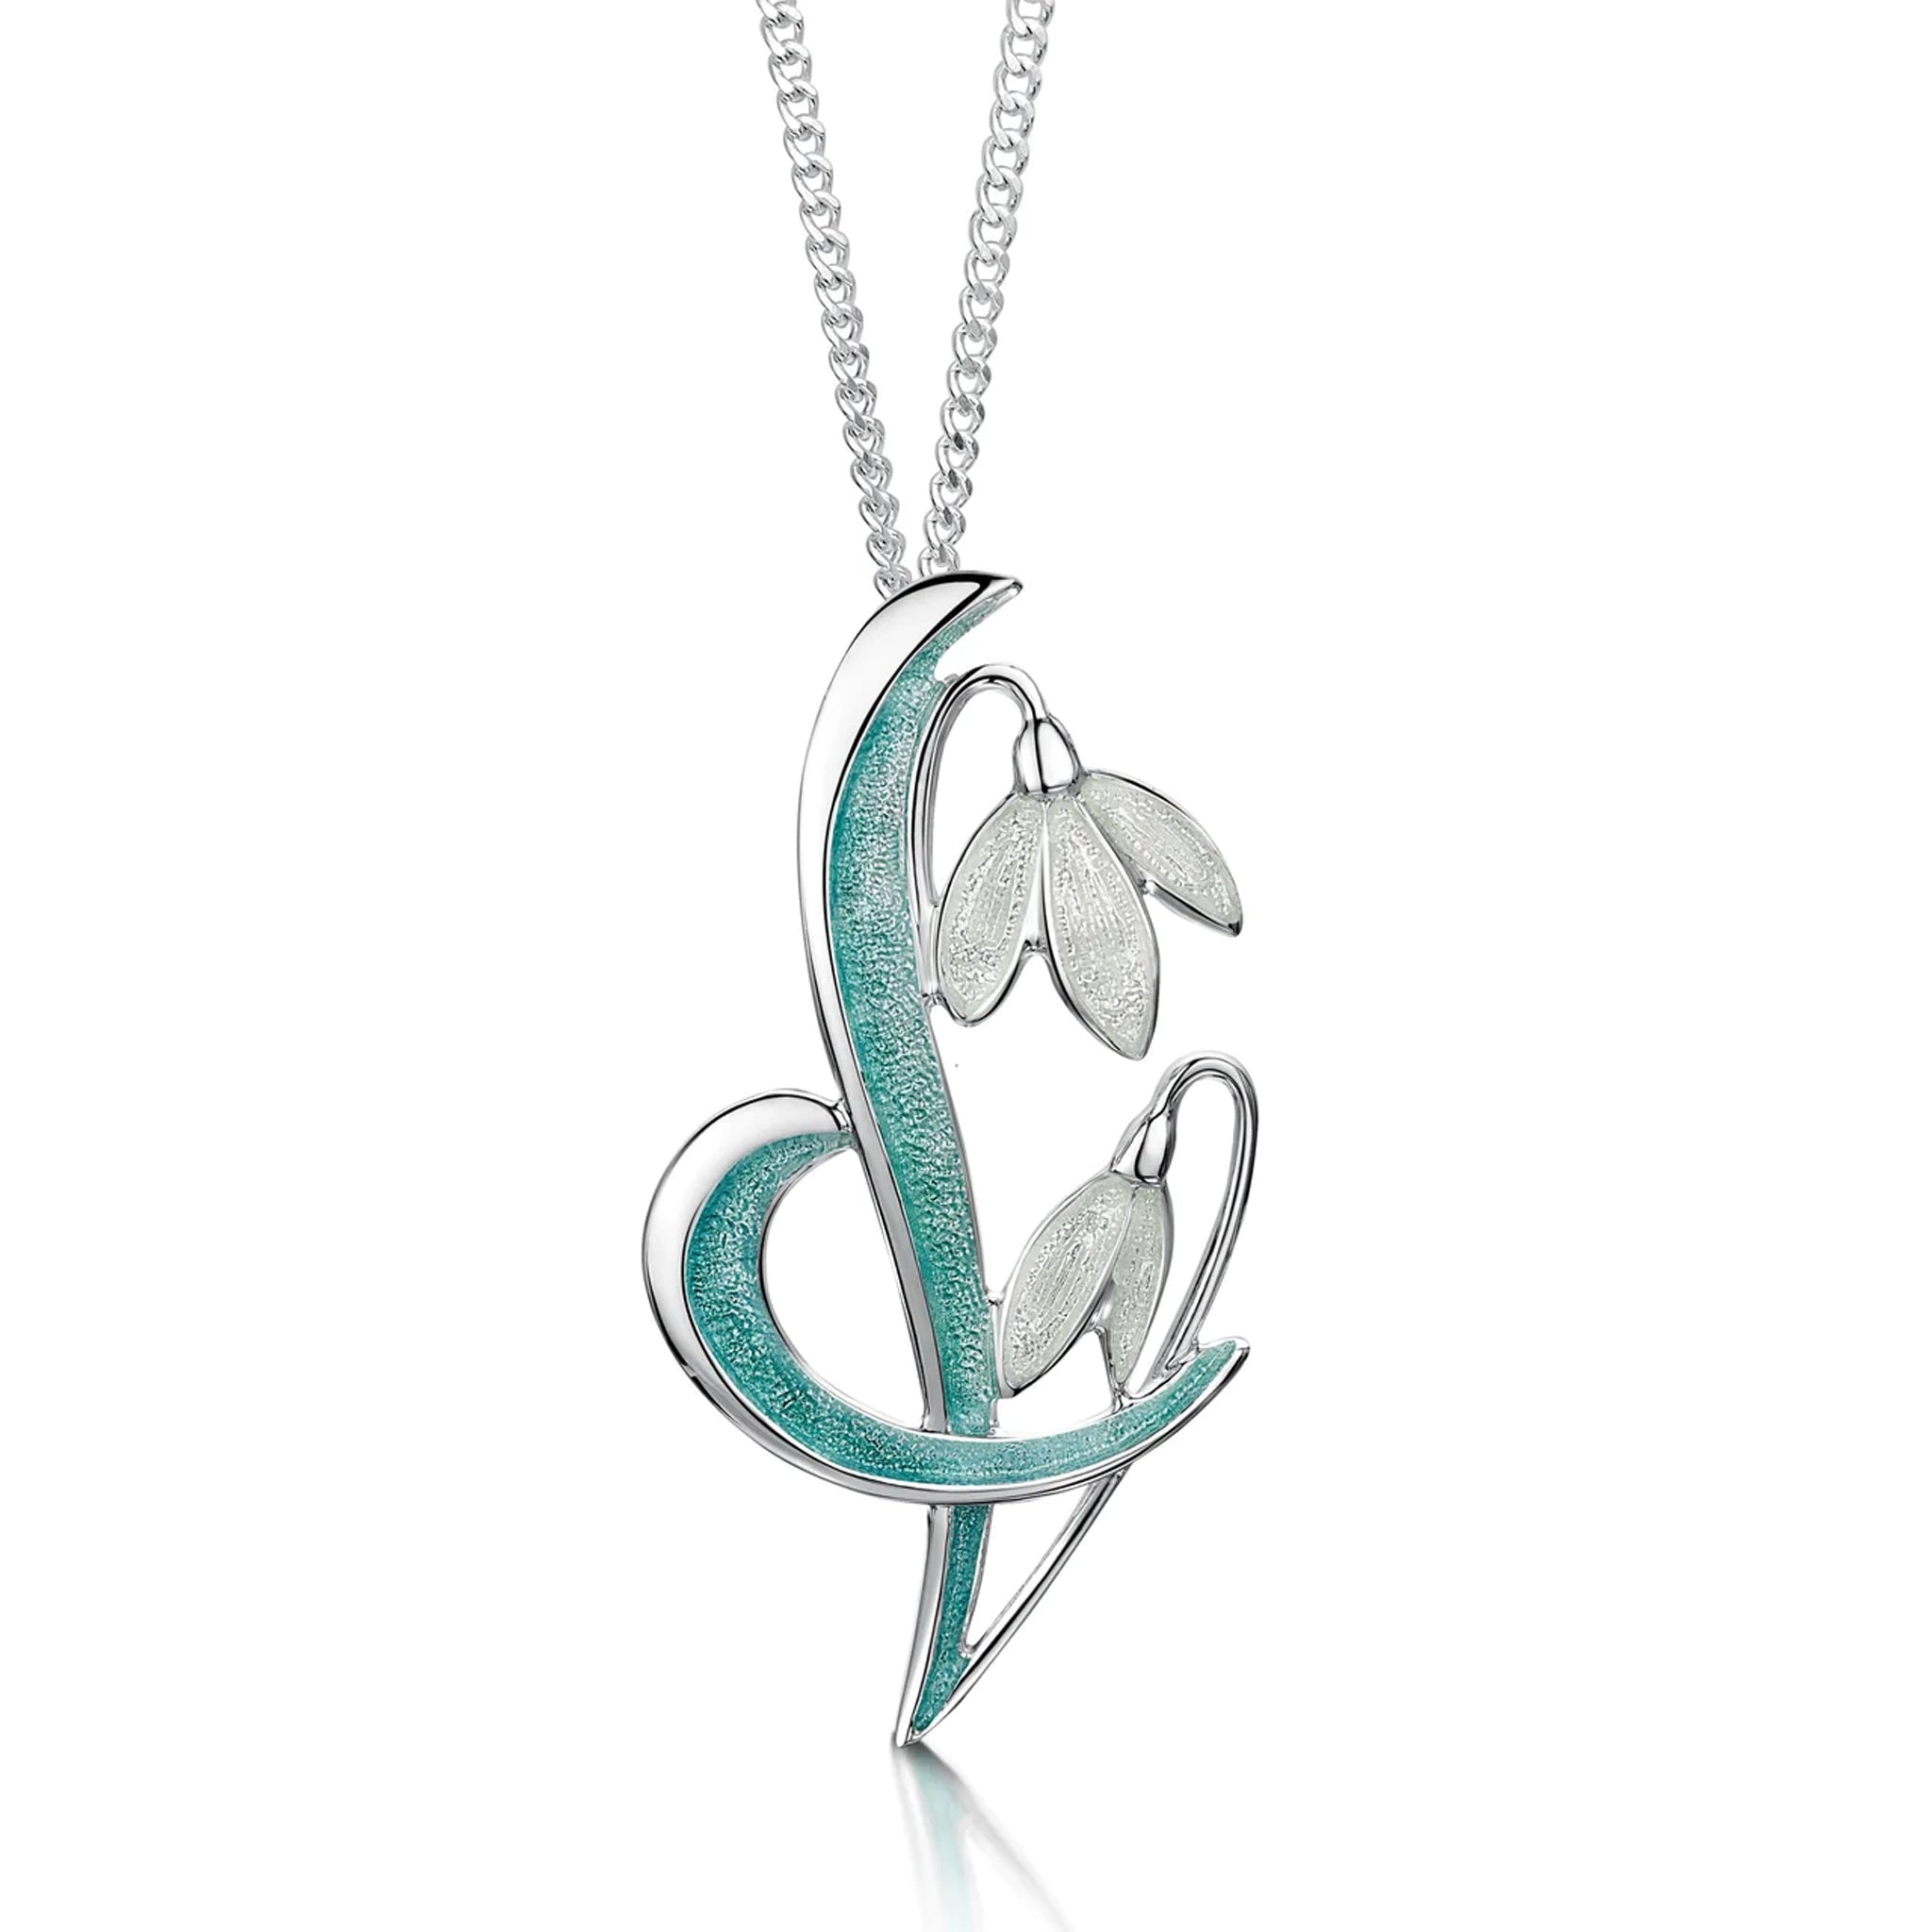 Silver pendant with two snowdrop flowers in green and white enamel on a silver chain